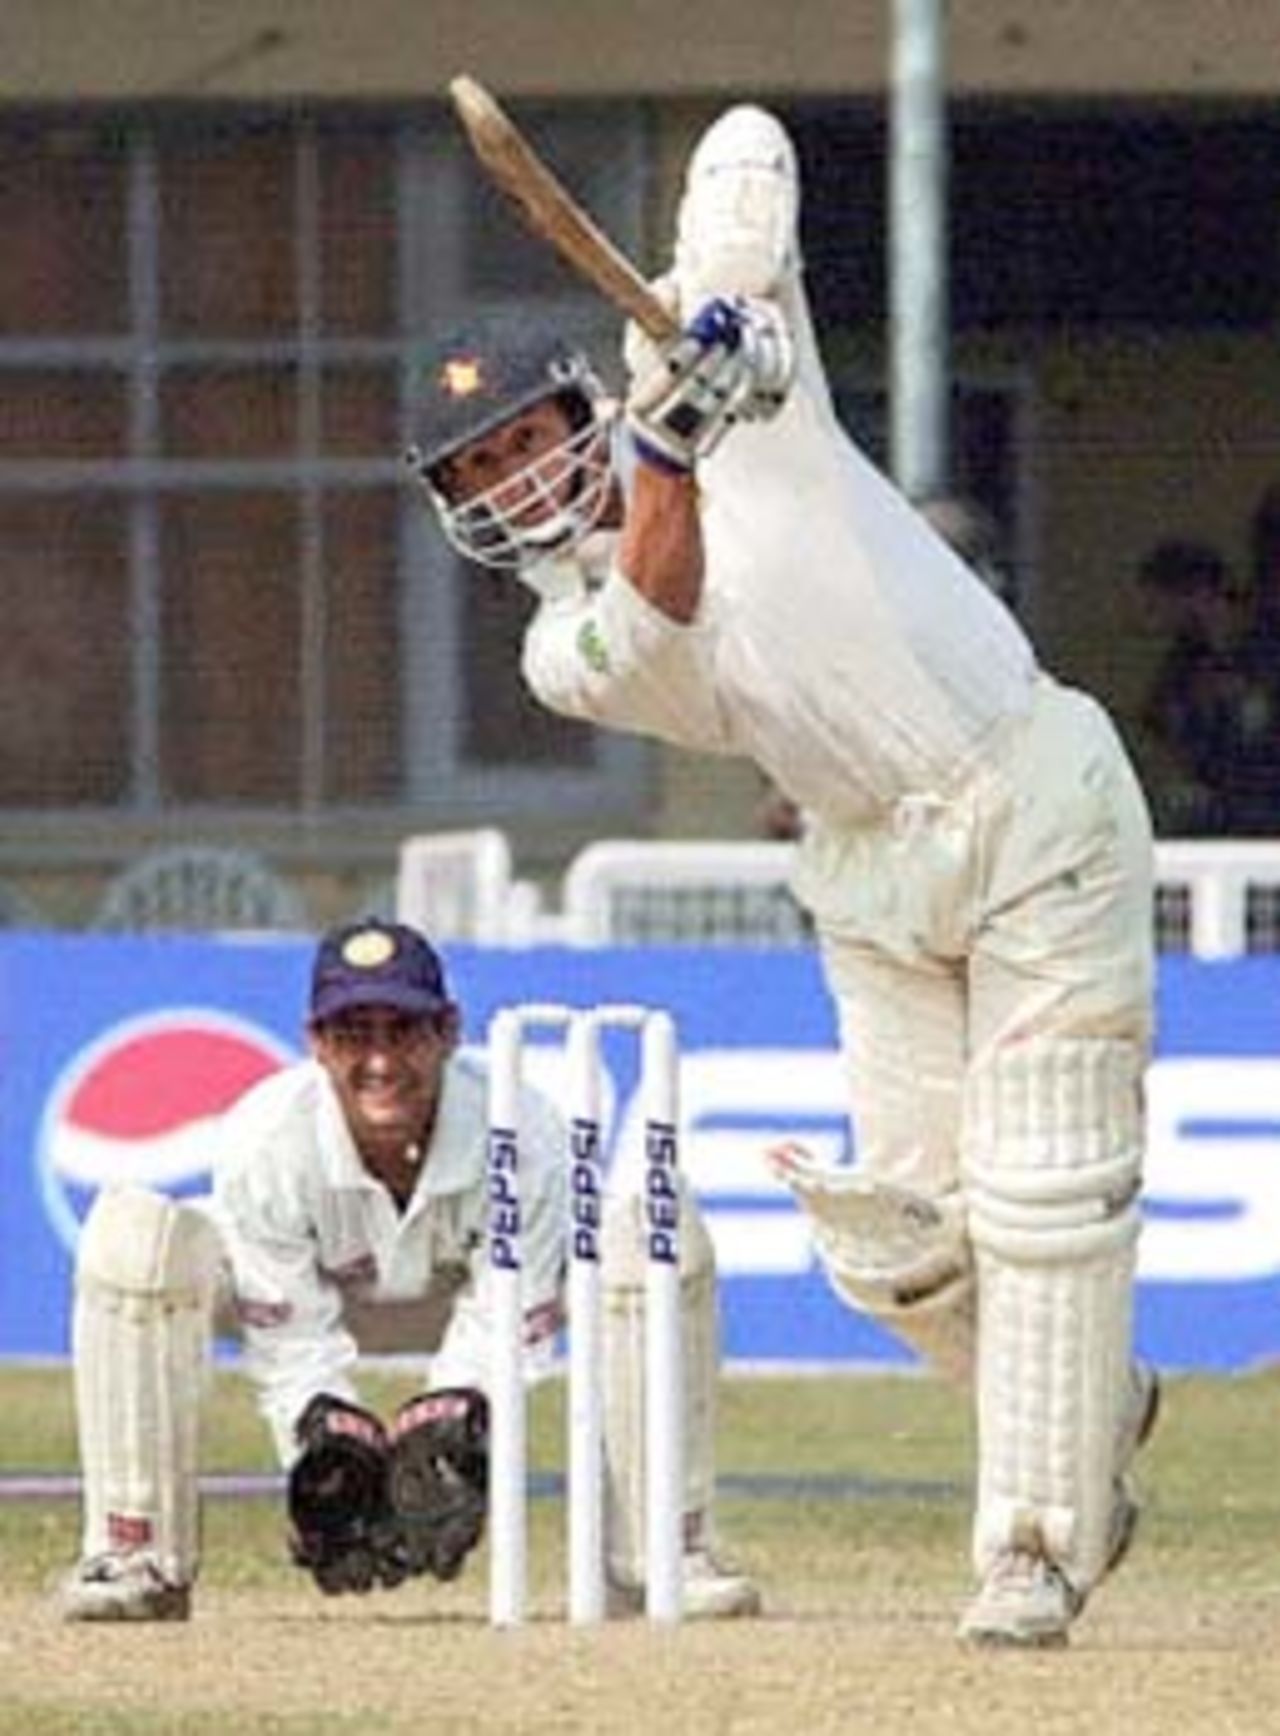 Zimbabwe batsman Guy Whittall hits a delivery from Indian pace bowler Venkatesh Prasad (not in picture) as Indian wicketkpeer Vijay Dahiya (L) looks on during the fourth one-day international match between India and Zimbabwe at Green Park ground in Kanpur 11 December 2000. Zimbabwe were shot out 165 for 45.5 overs in the crucial fourth one-dayer.